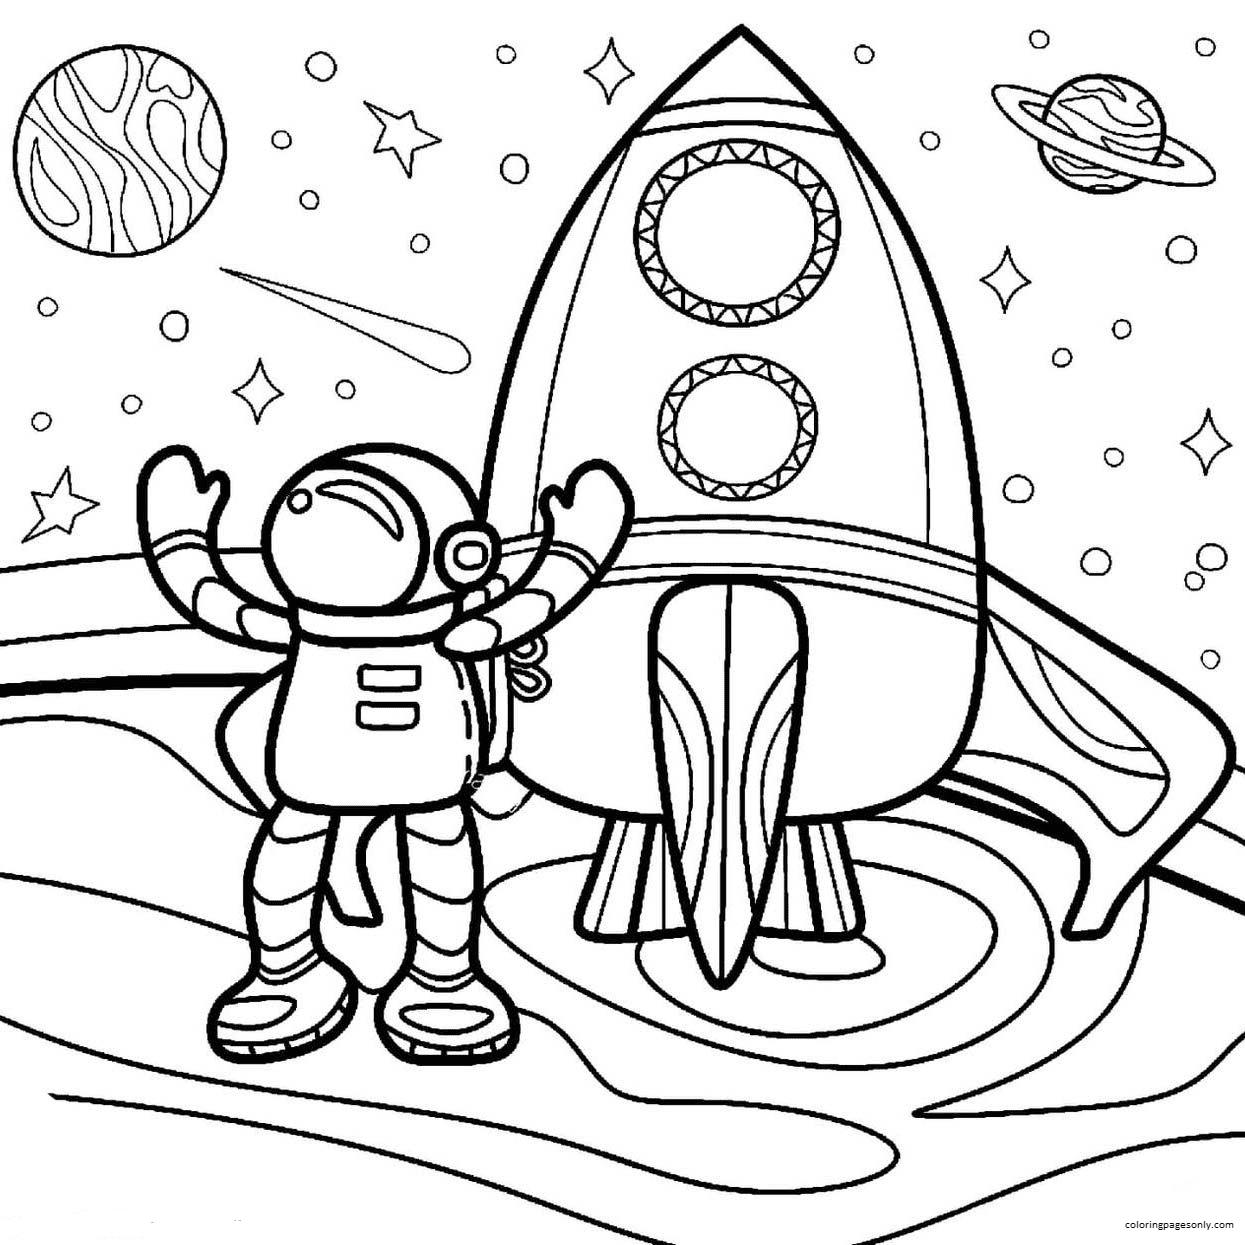 Cartoon Astronaut With Rocket Coloring Pages